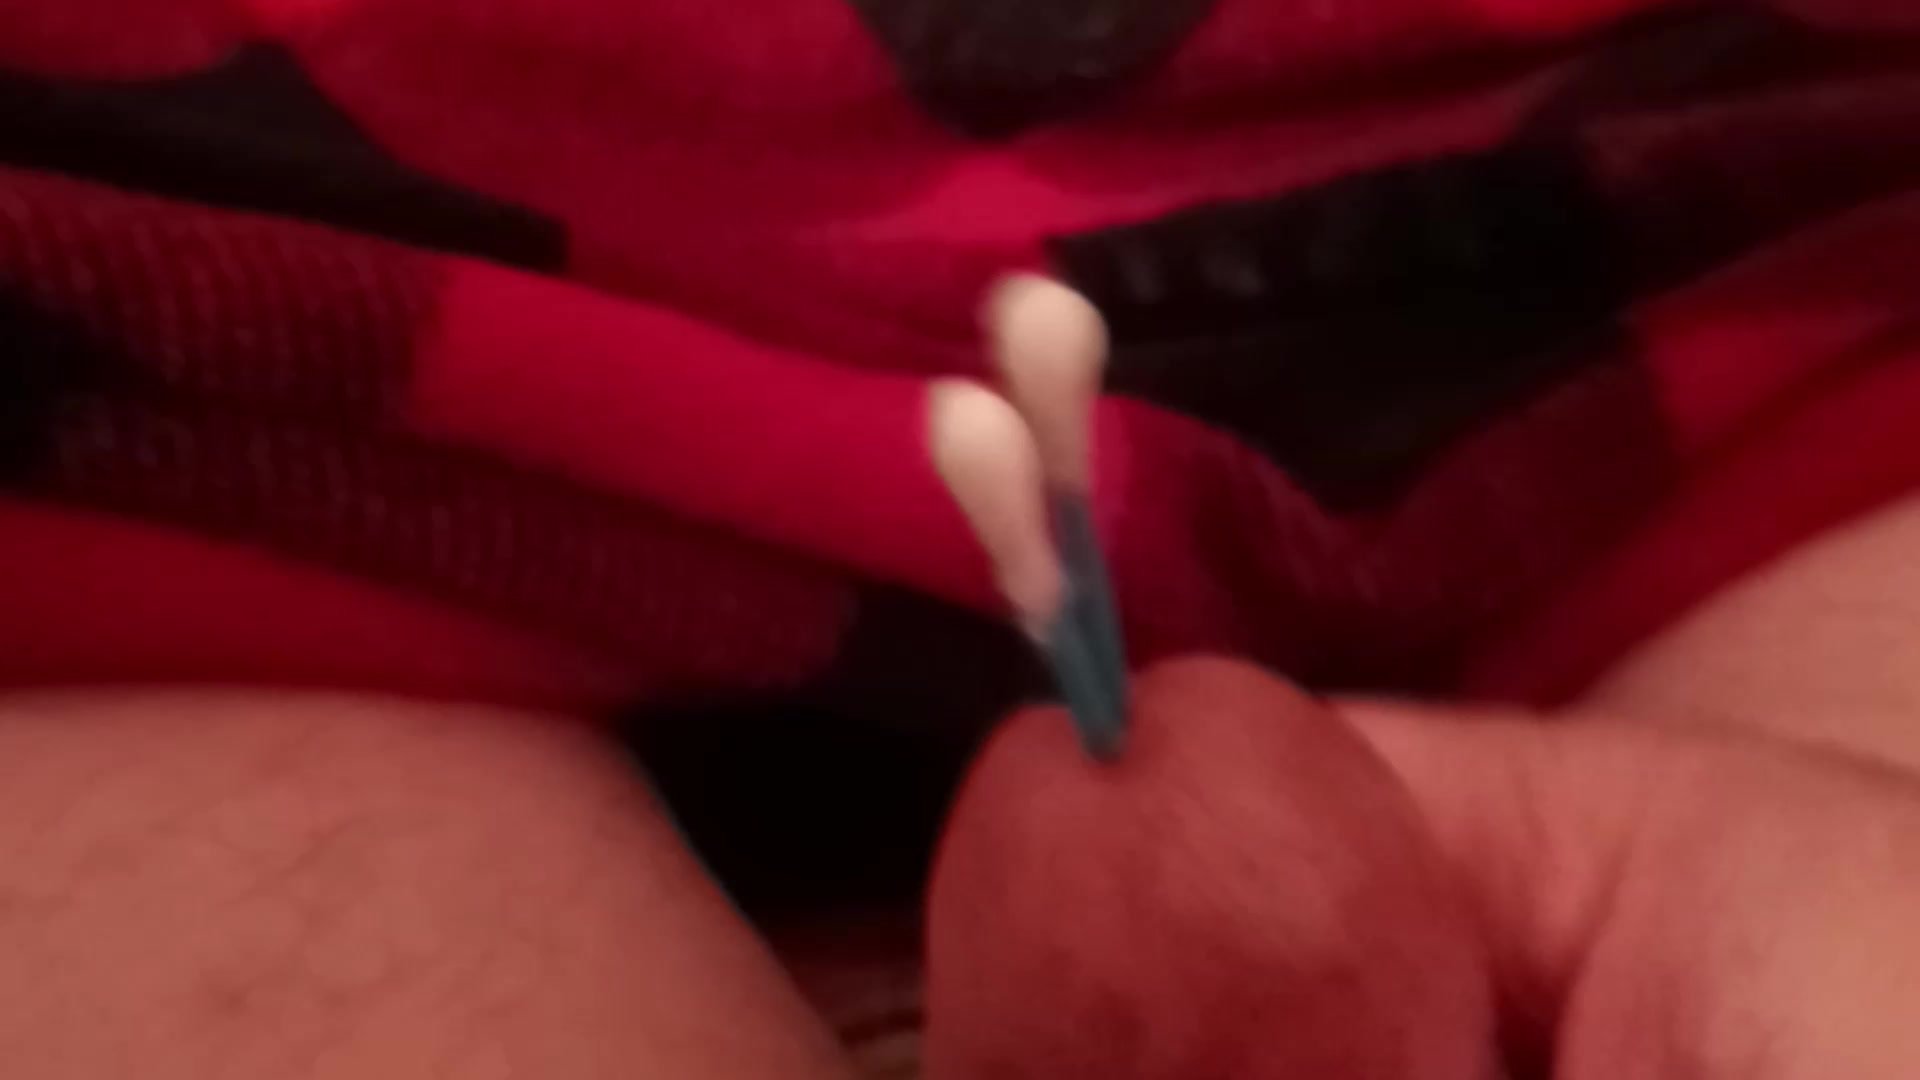 Sounding cotton swabs in my cock.